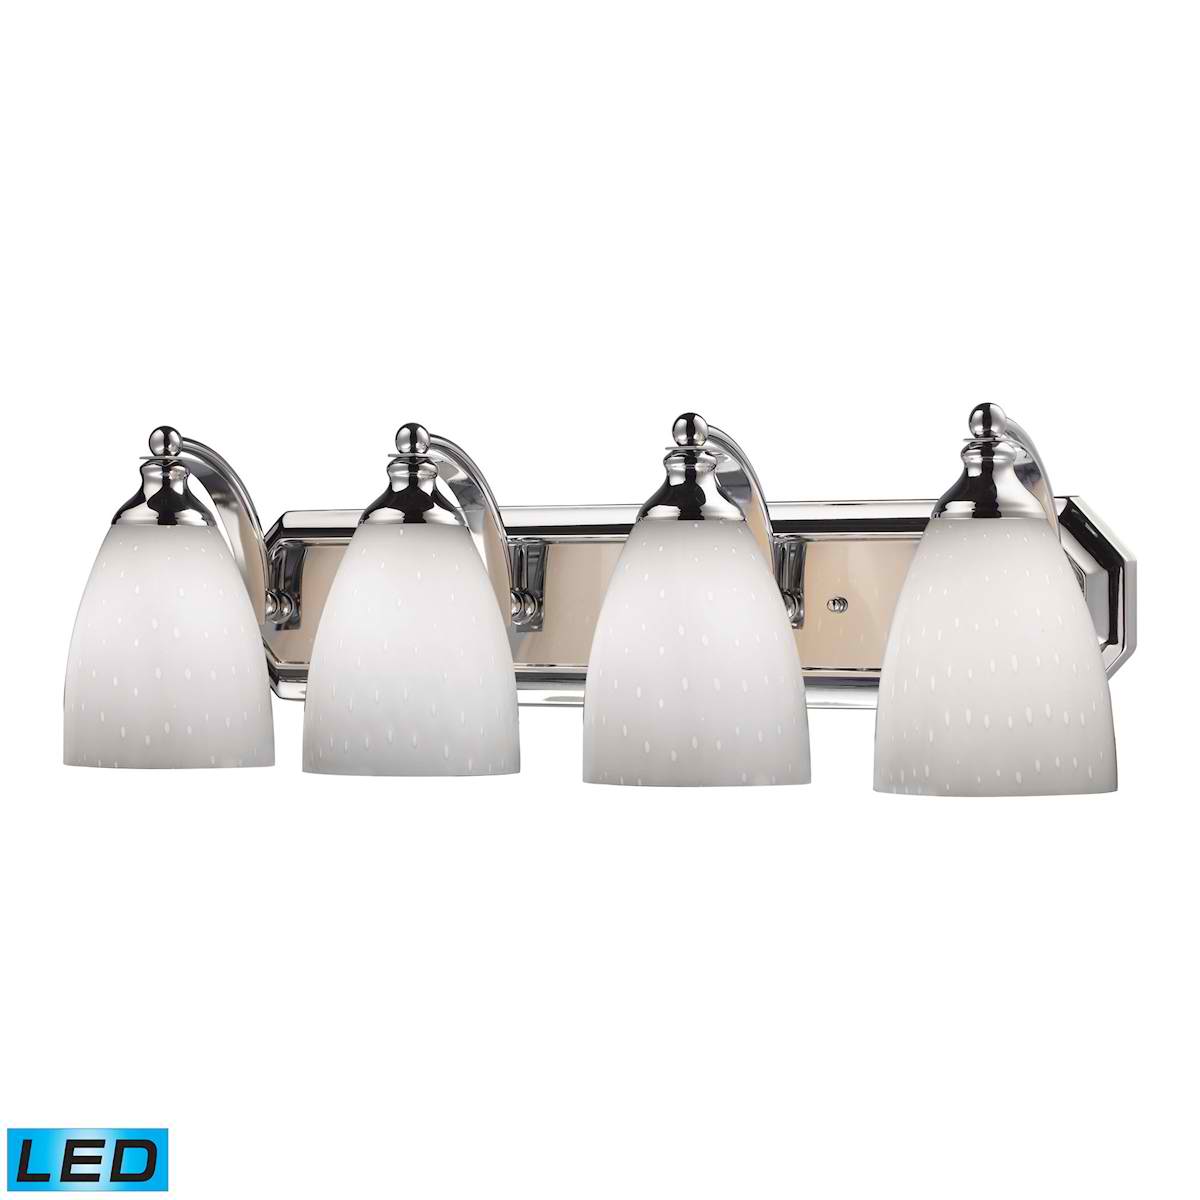 4 Light Vanity in Polished Chrome and Simply White Glass - LED, 800 Lumens (3200 Lumens Total) With Full Scale